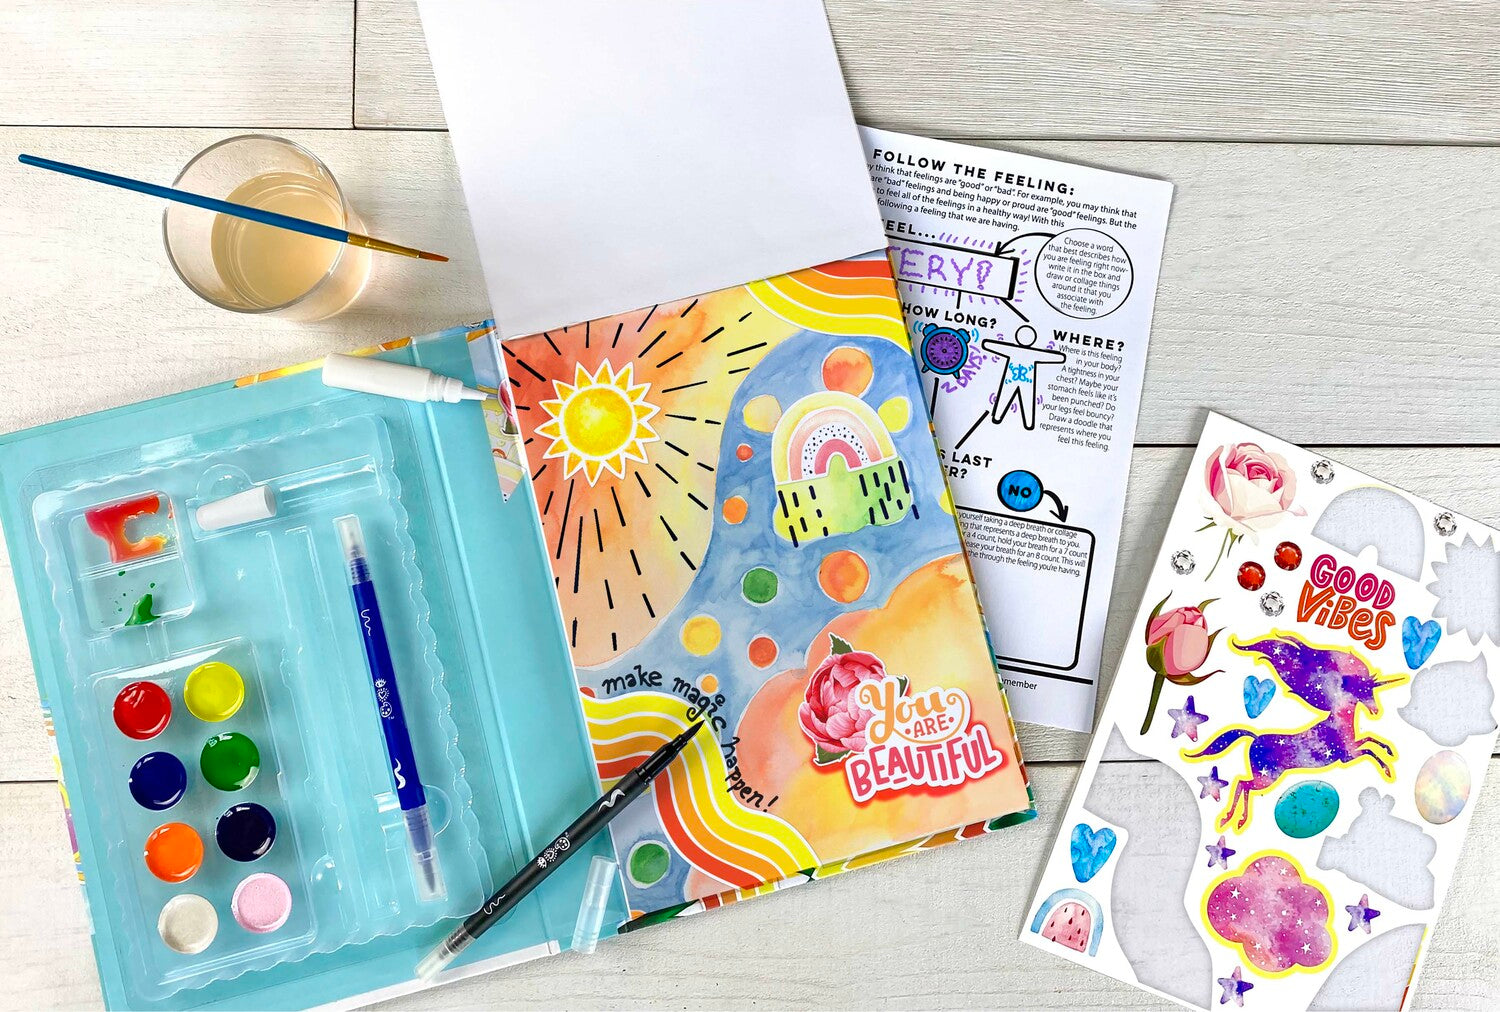 iHeart Art Travel Art Pack Watercolor + Pens — Boing! Toy Shop